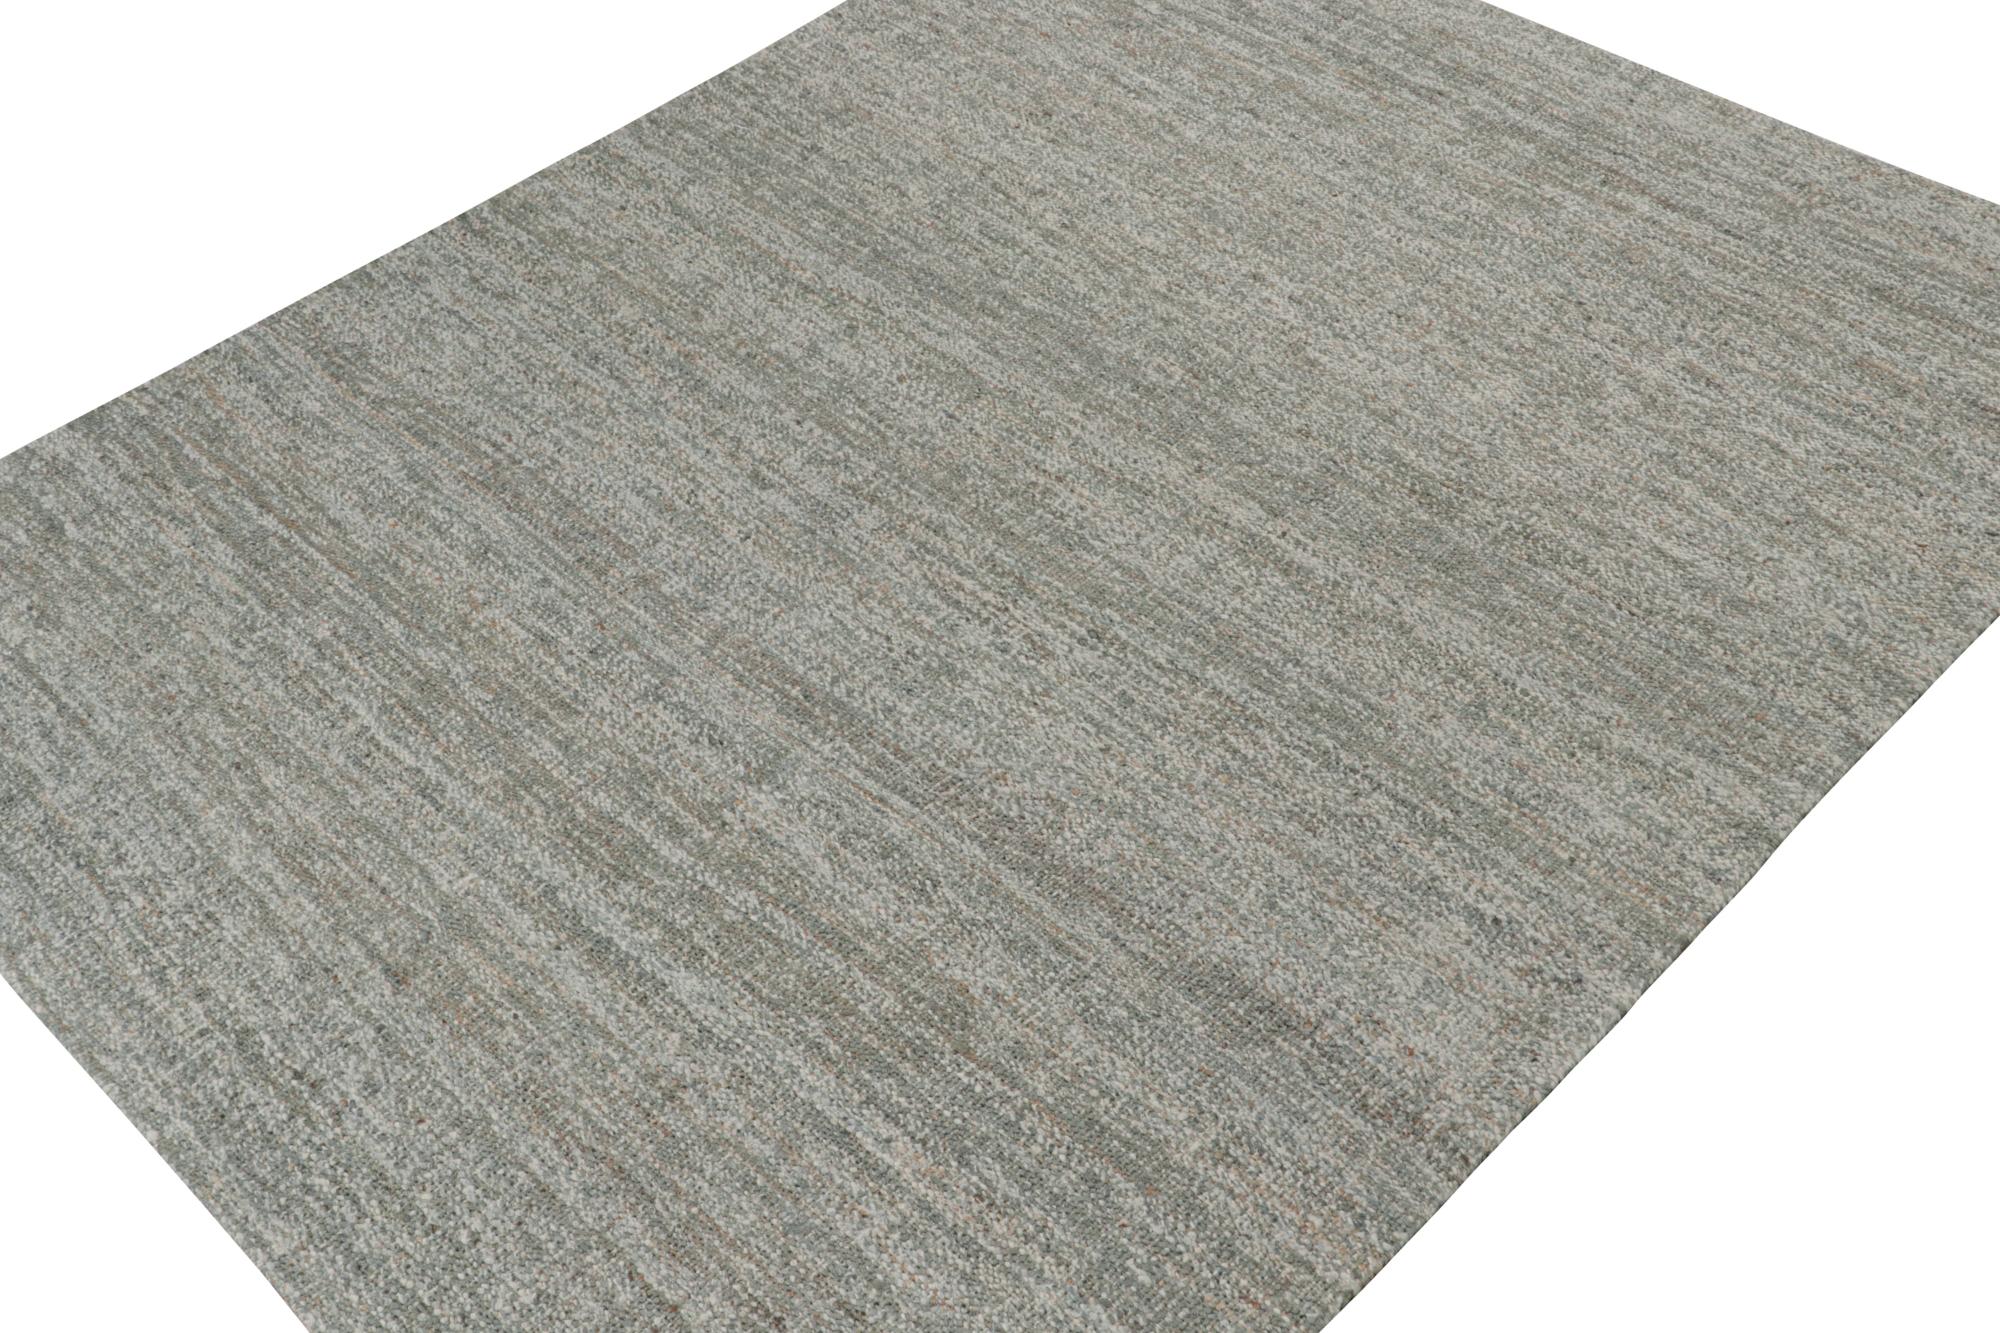 Indian Rug & Kilim’s Contemporary Jute Kilim in Tones of Gray For Sale